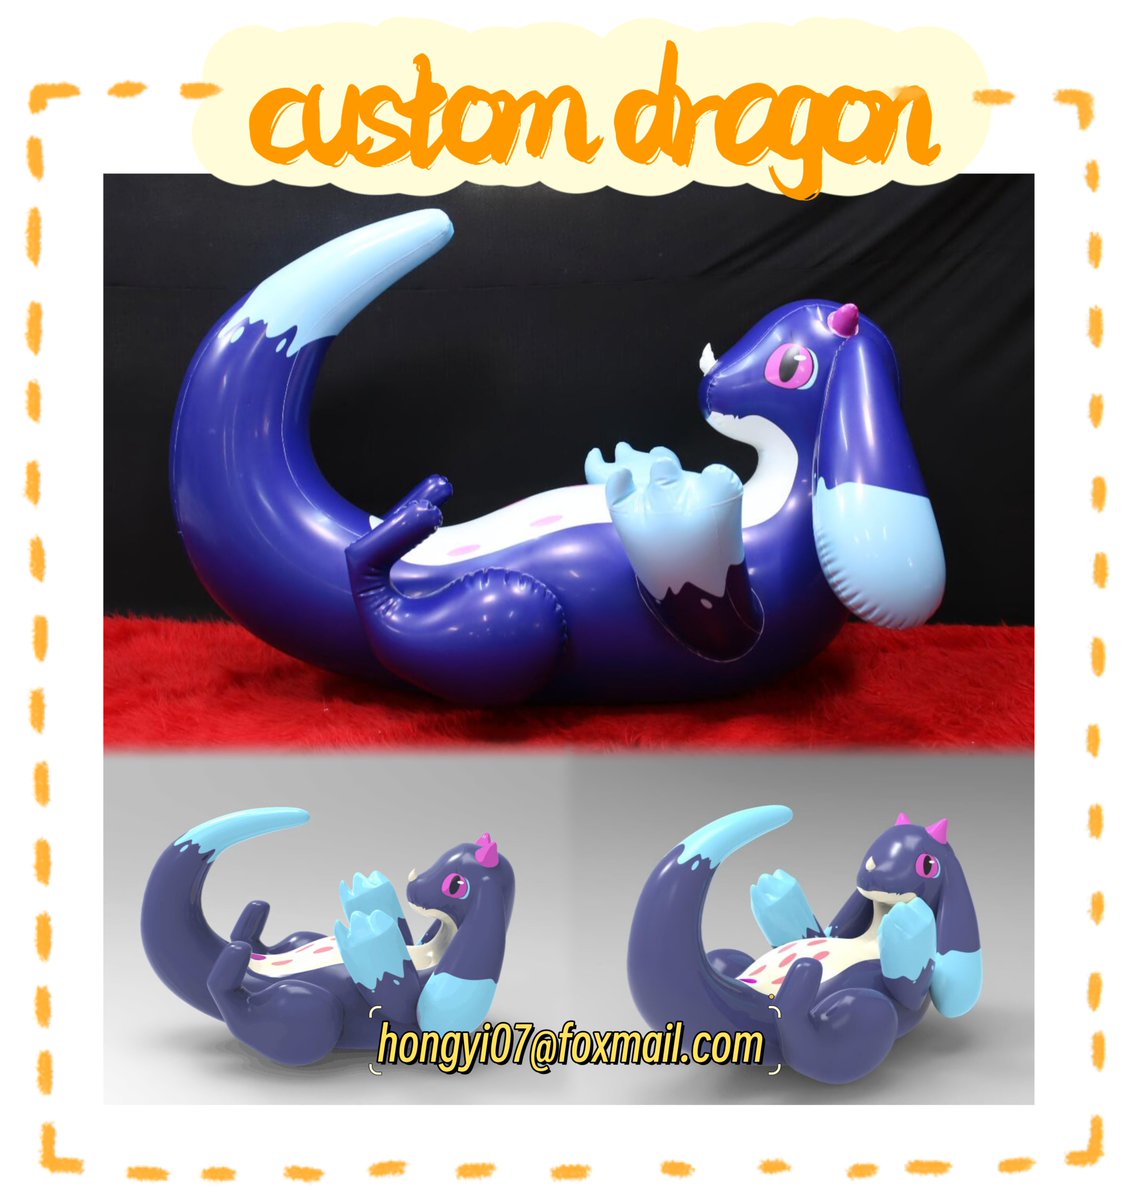 Cute laying dragon😈💜
Any interest please DM @Kristalyn_Wu
📨hongyi07@foxmail.com

#inflatabledragon #inflatableanimals #pooltoy #airdoll #squealy